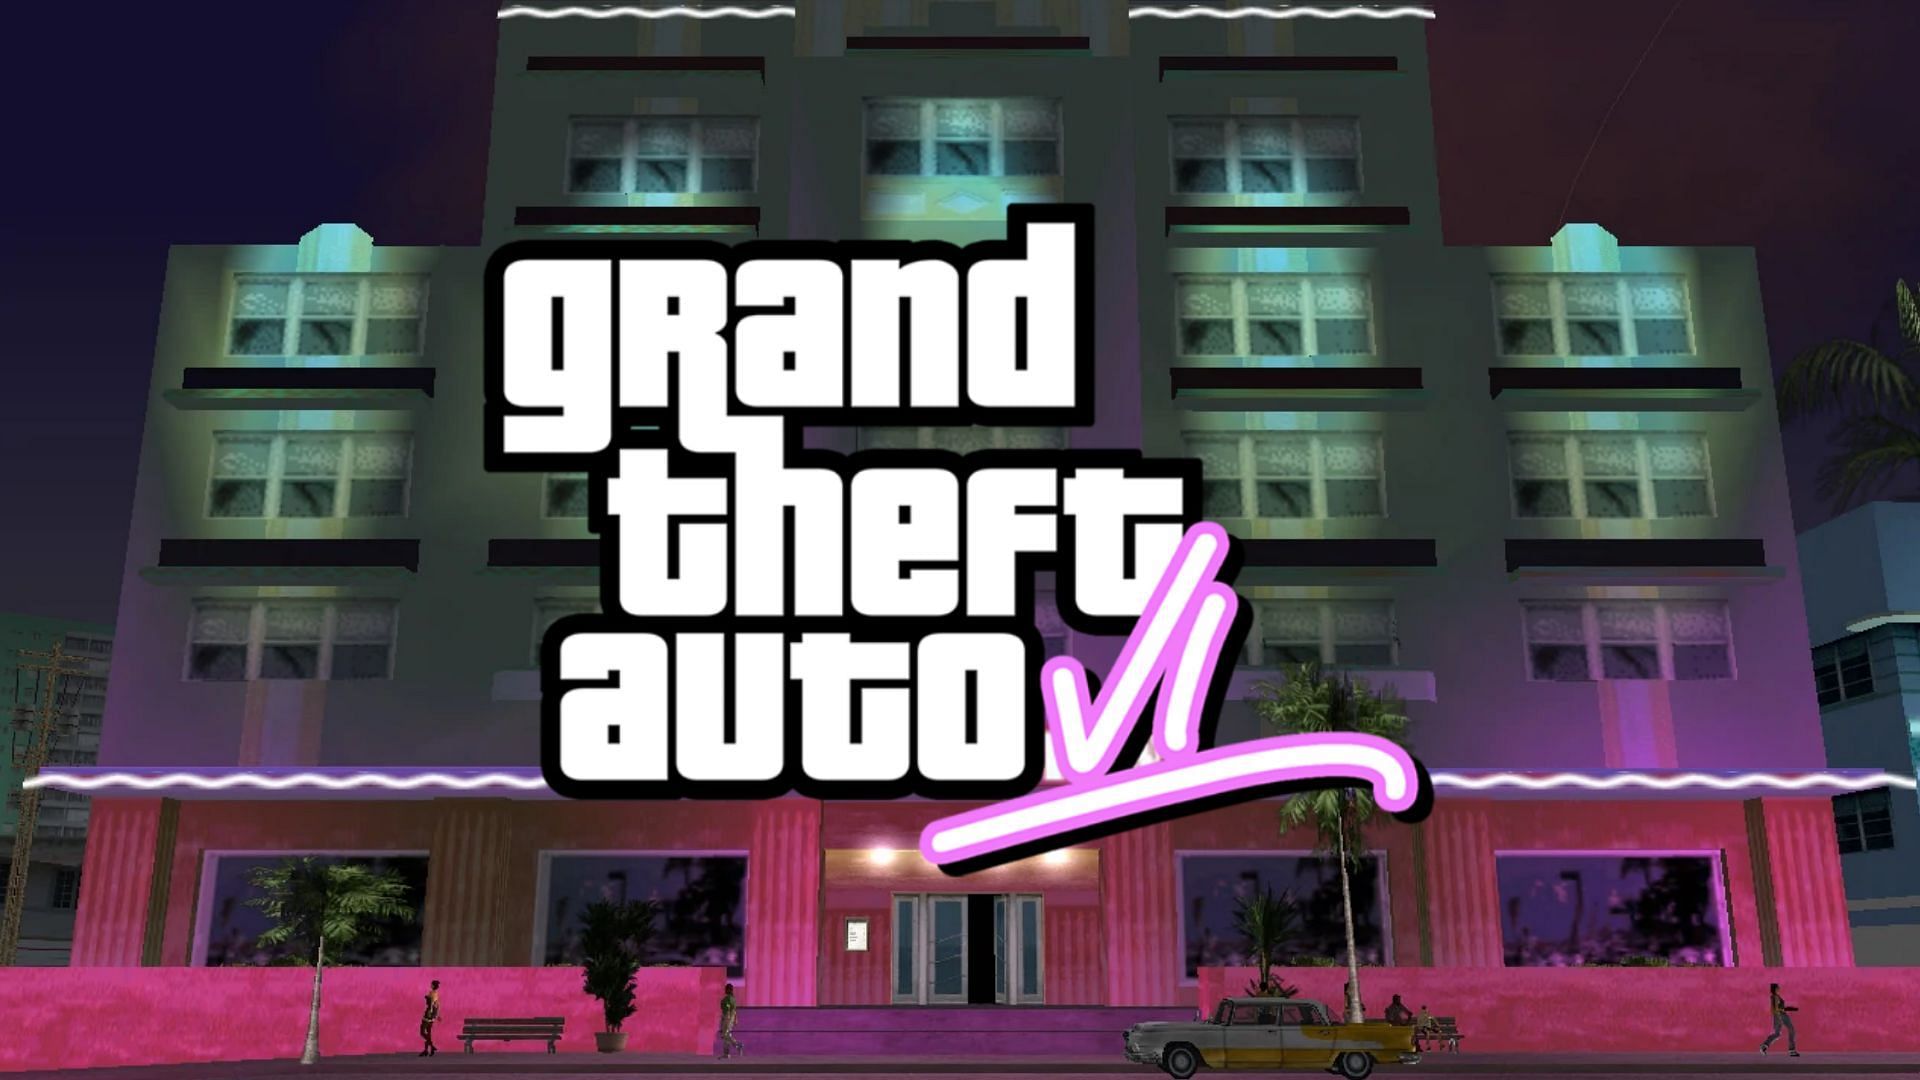 First GTA 6 screenshot 'LEAKED online' from new Vice City-style